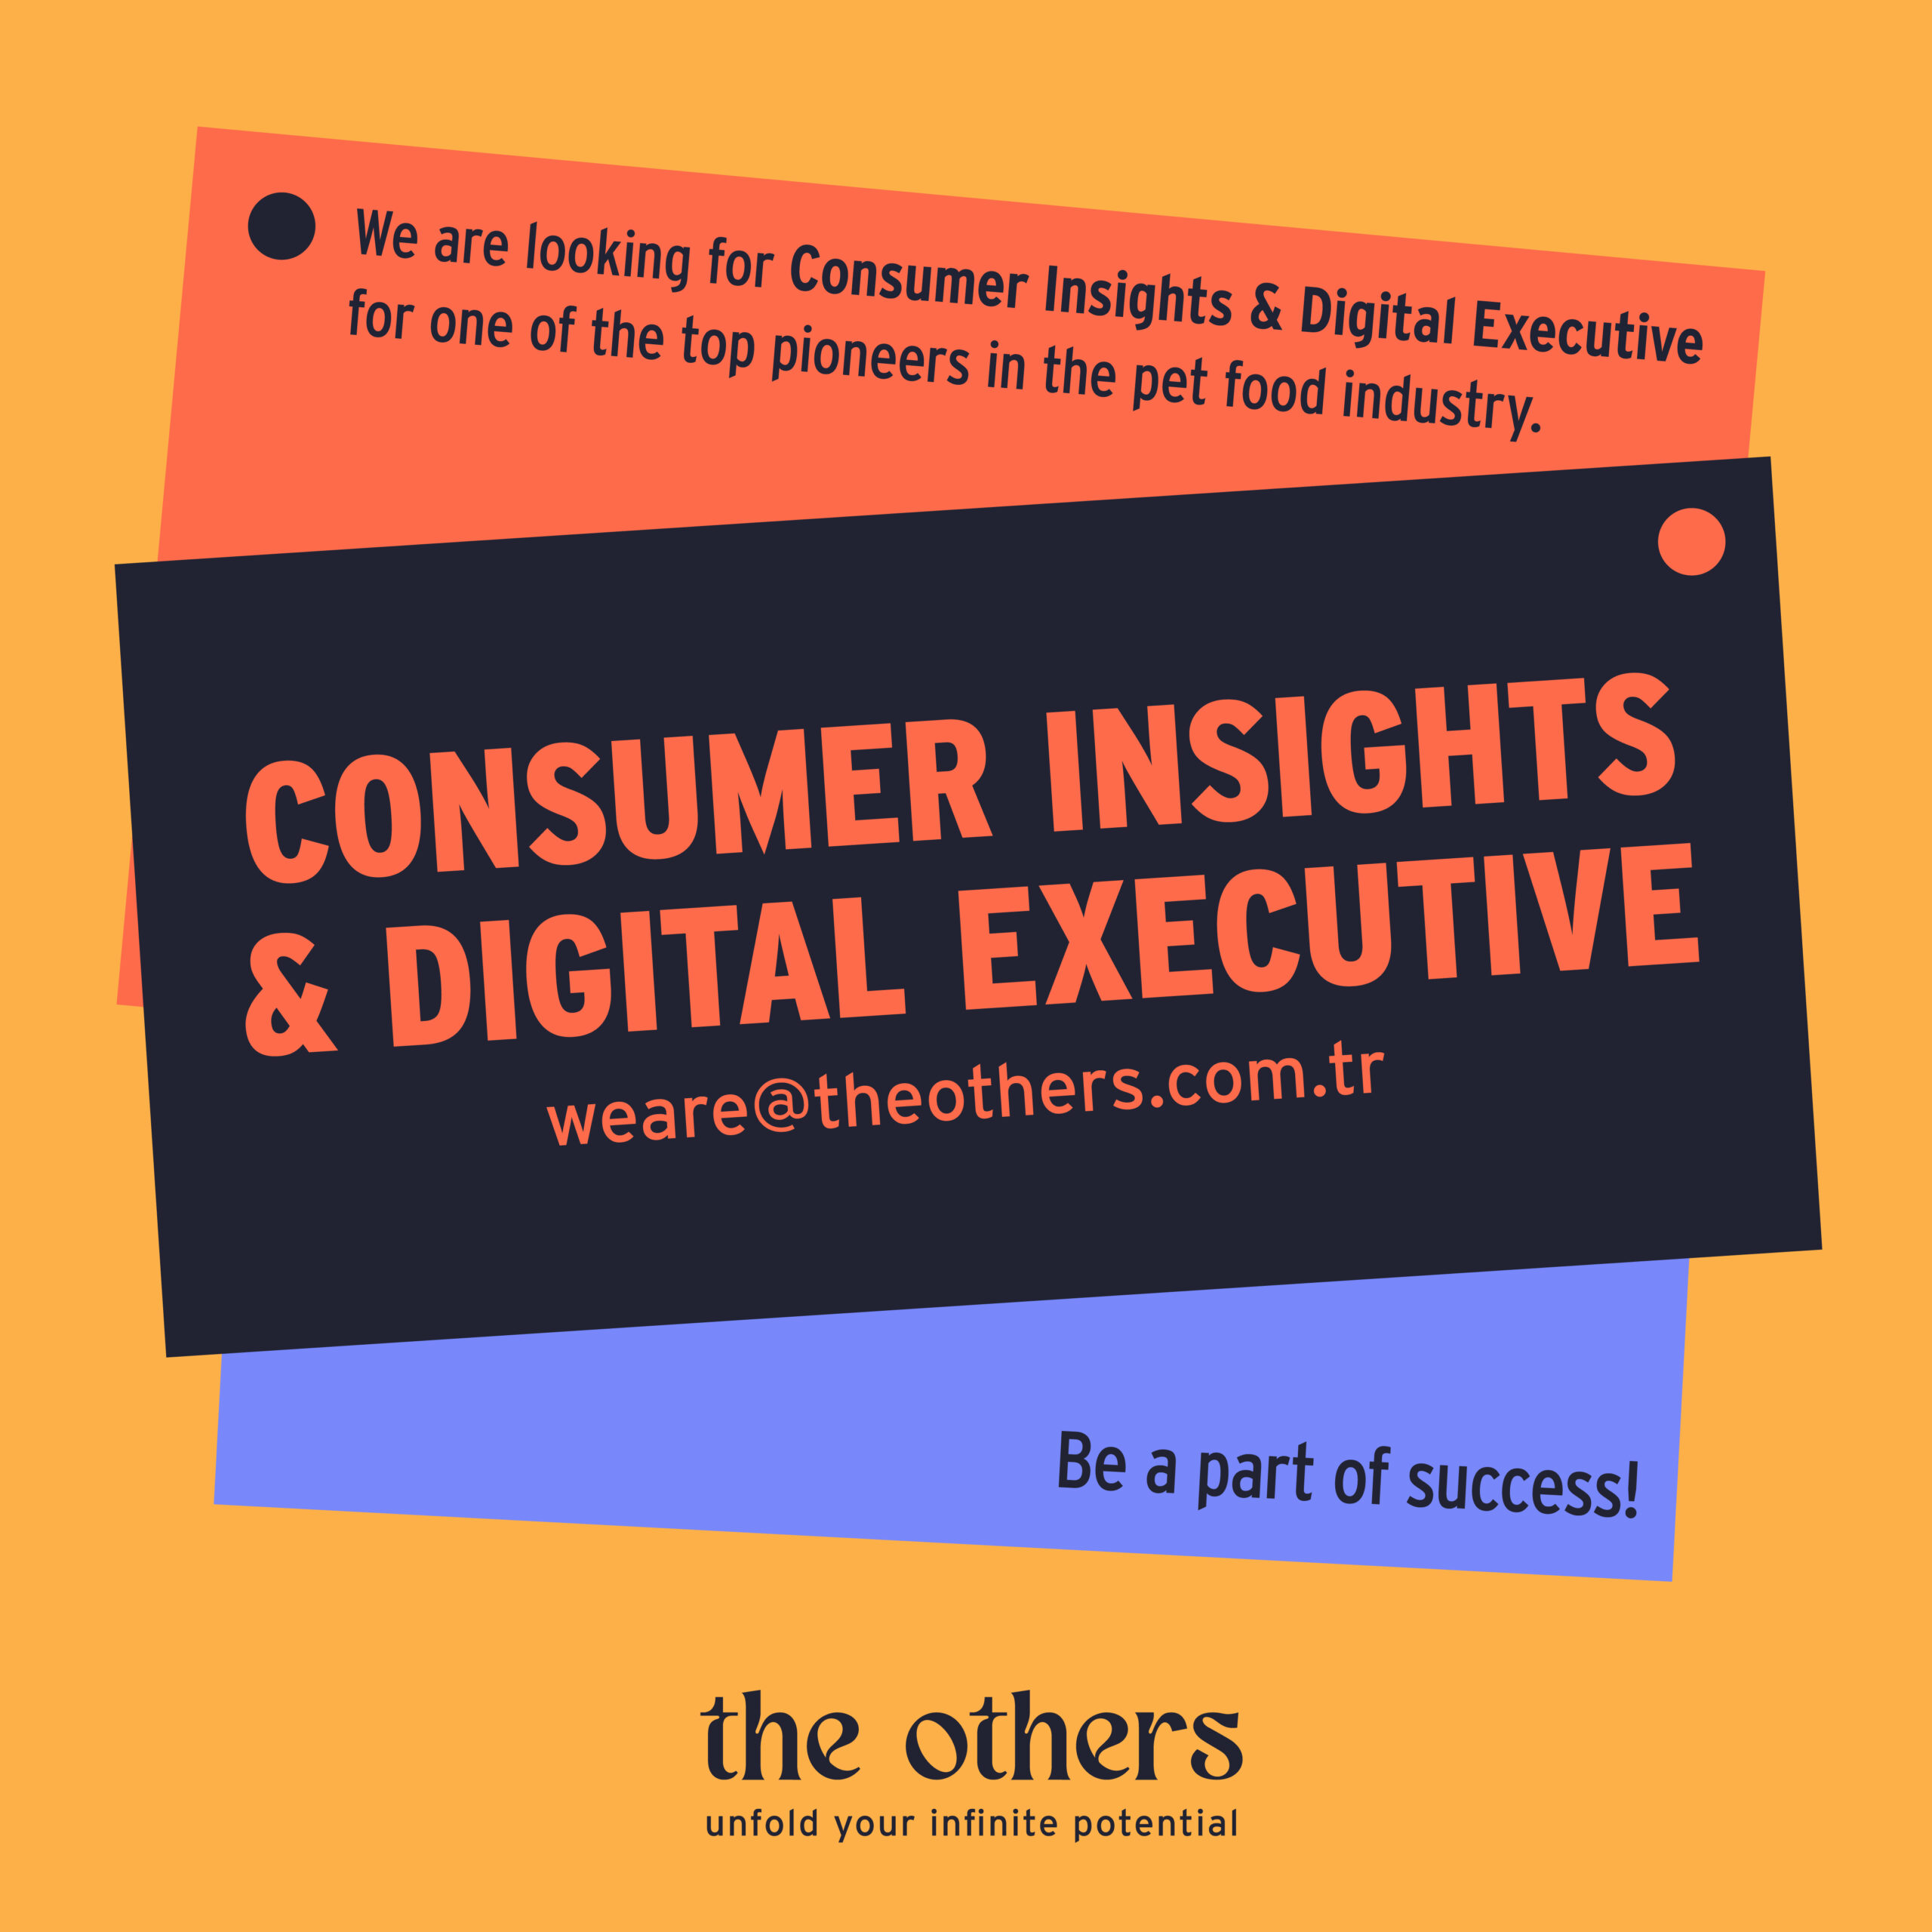 The Others looking for Consumer Insight & Digital Executive!